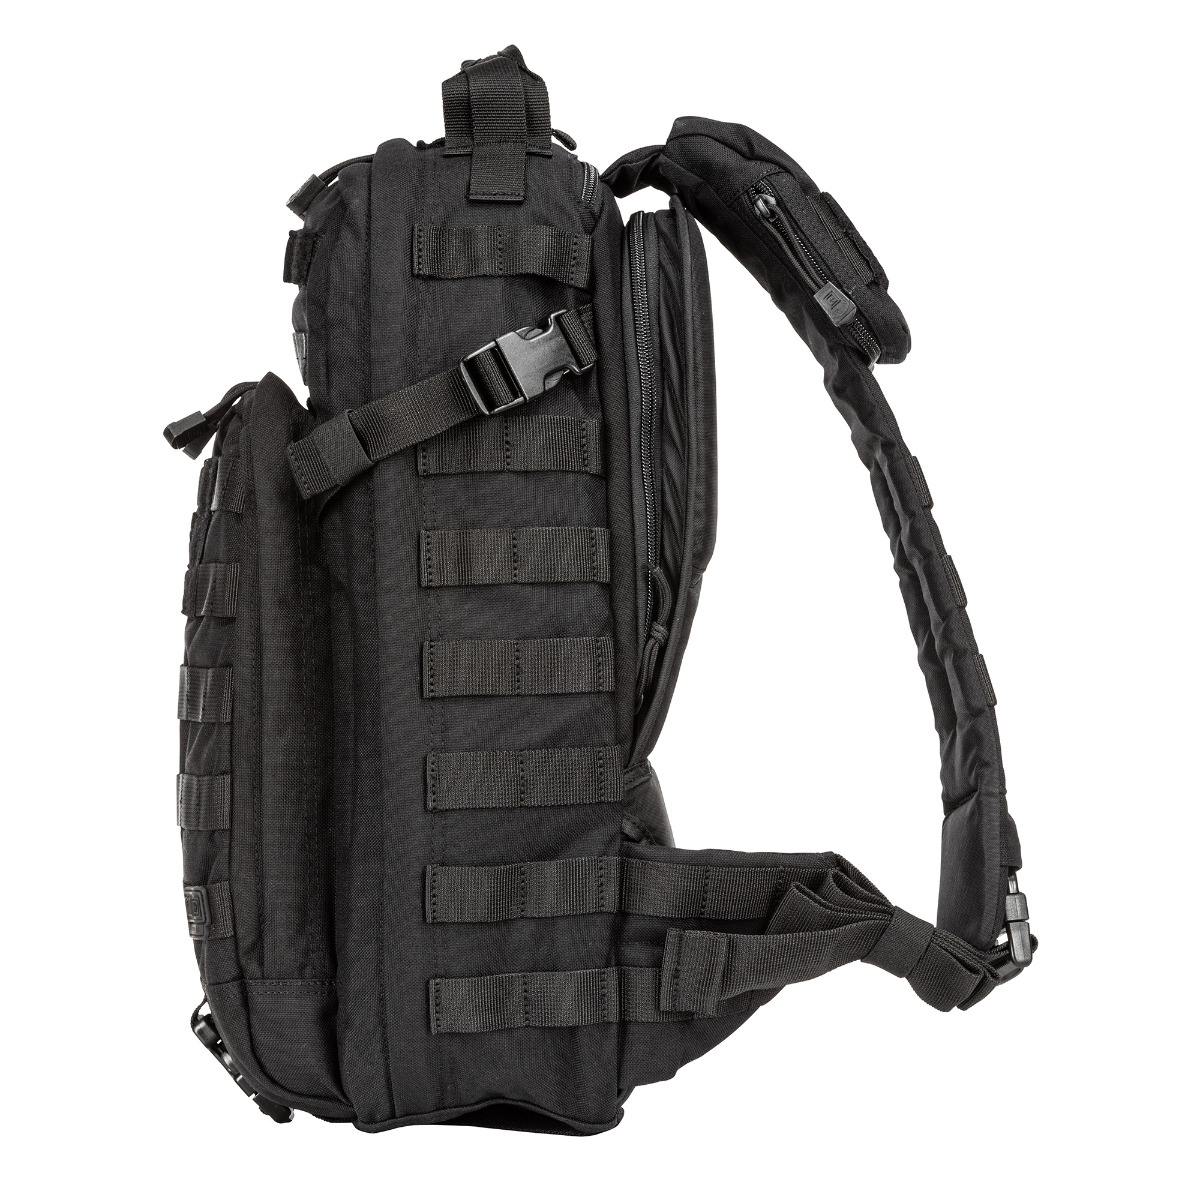 5.11 TACTICAL RUSH MOAB™ 10 PACK 56964 / BLACK 019 * NEW * Free Shipping!-img-1